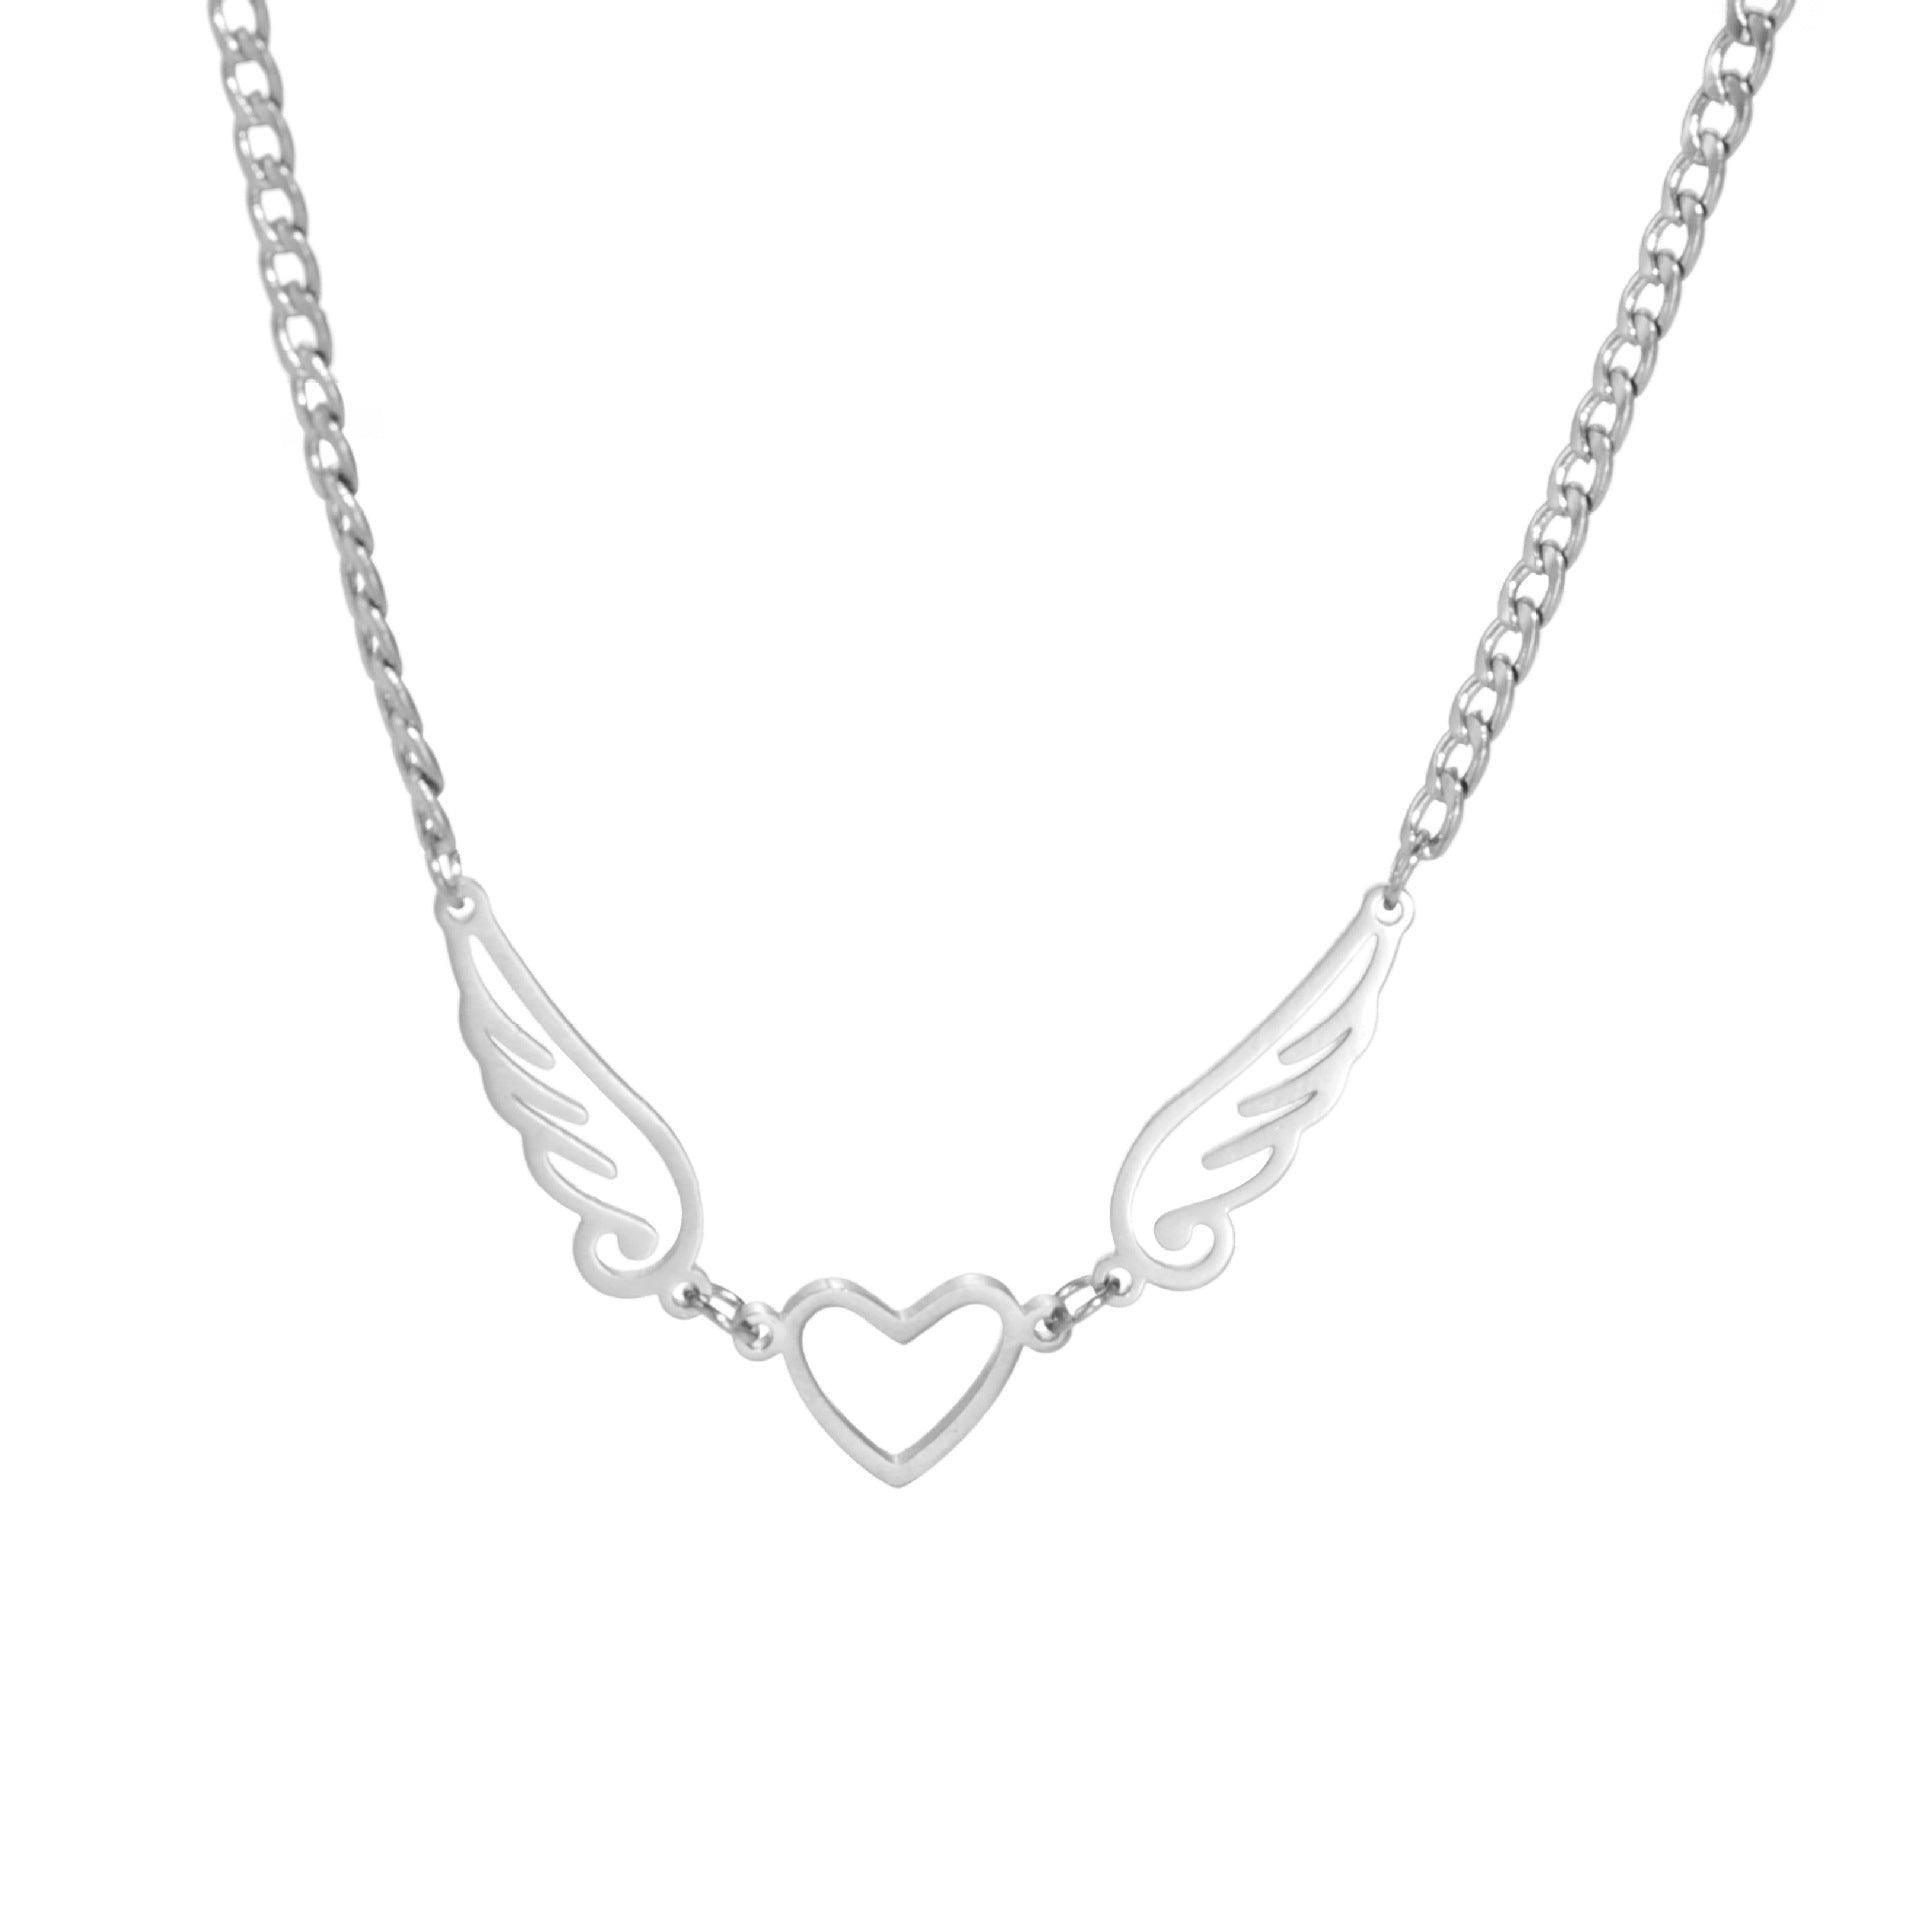 Winged Heart Necklaces: Unique Charm Jewelry Gifts-2